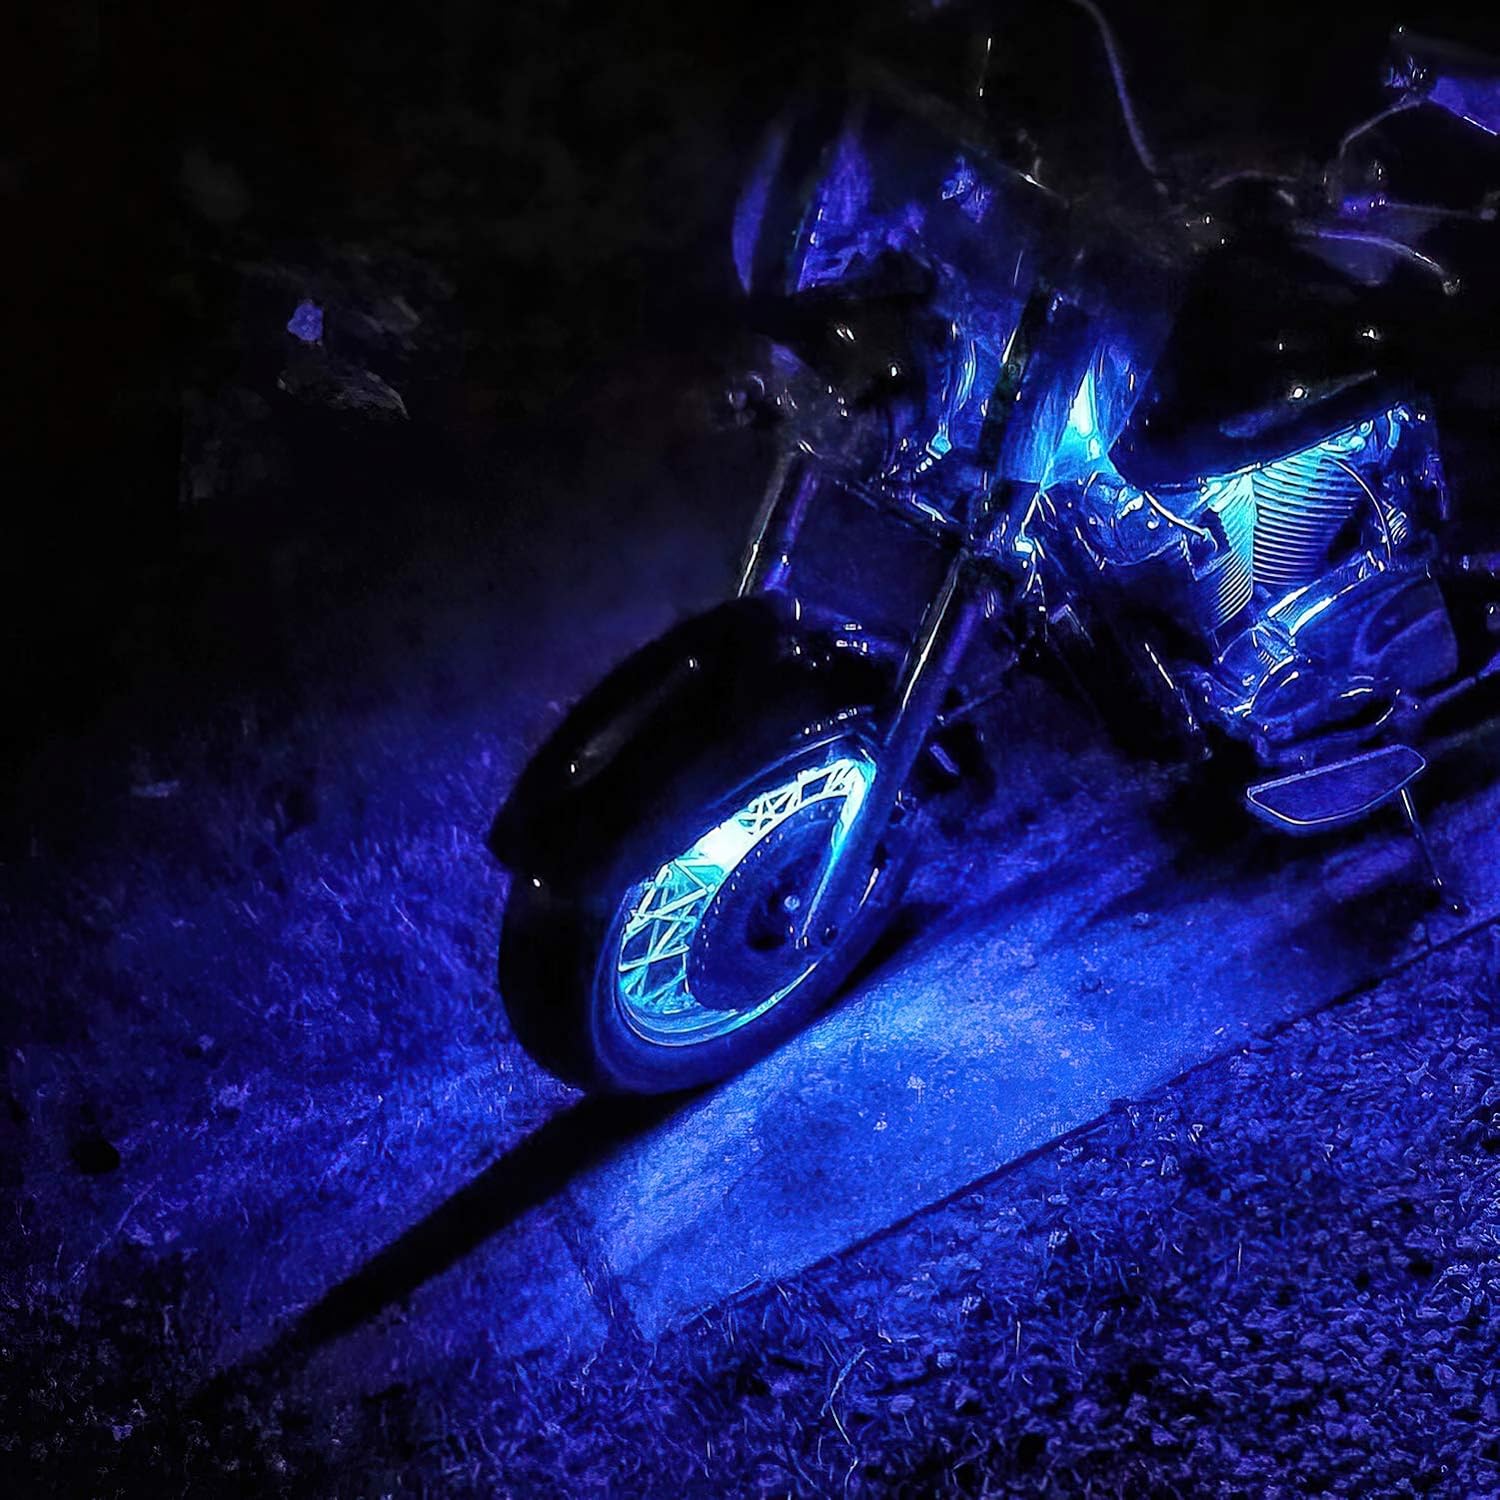 Light Kit Extension Cords and 2-Way Splitters for Underglow RGB LED Strip Light Kits on Motorcycles and Trikes 